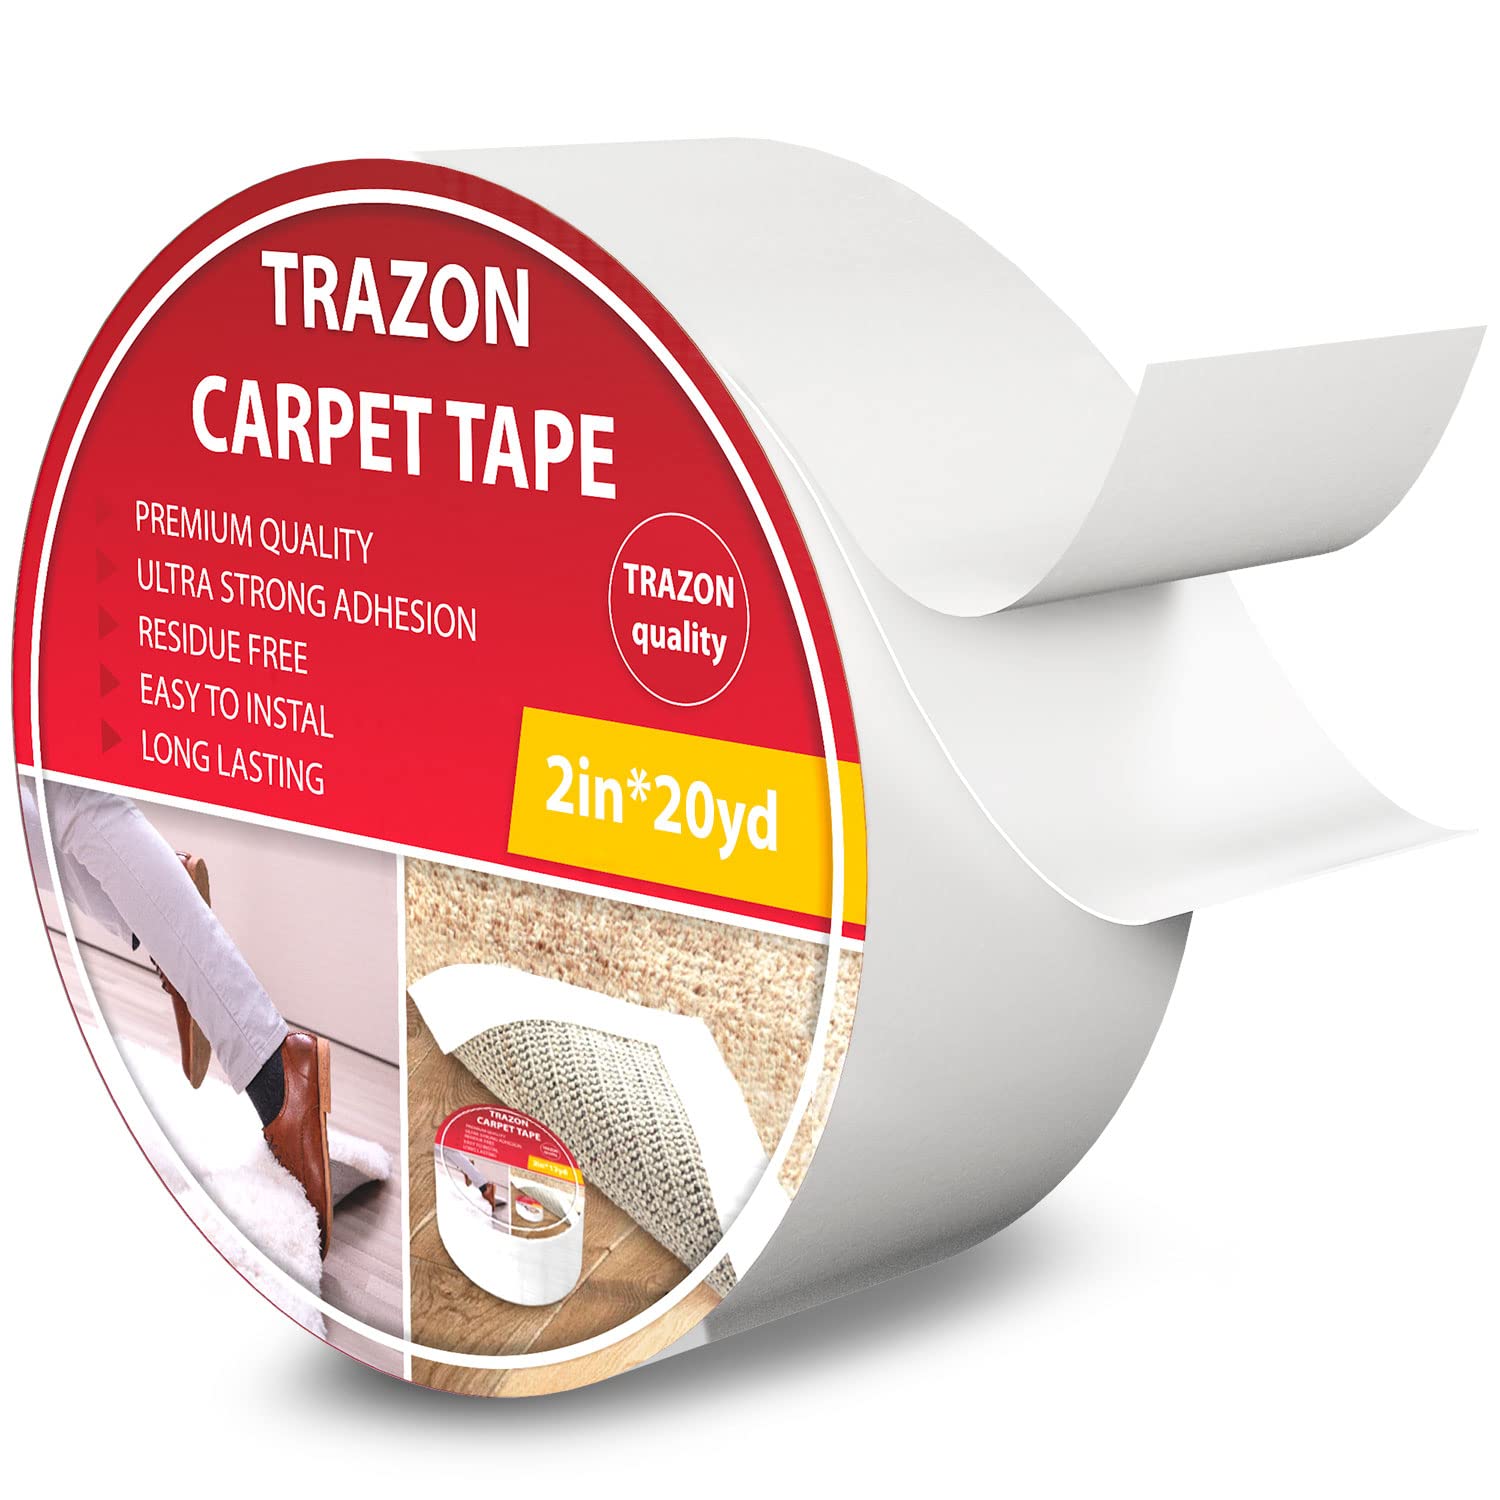 Double Sided Carpet Tape - Rug Grippers Tape for Area Rugs and Hardwood  Floors Safe - Carpet Binding Tape Removable Residue Free Strong Adhesive  and Heavy Duty Stickers Tape 2 Inch / 12 Yards